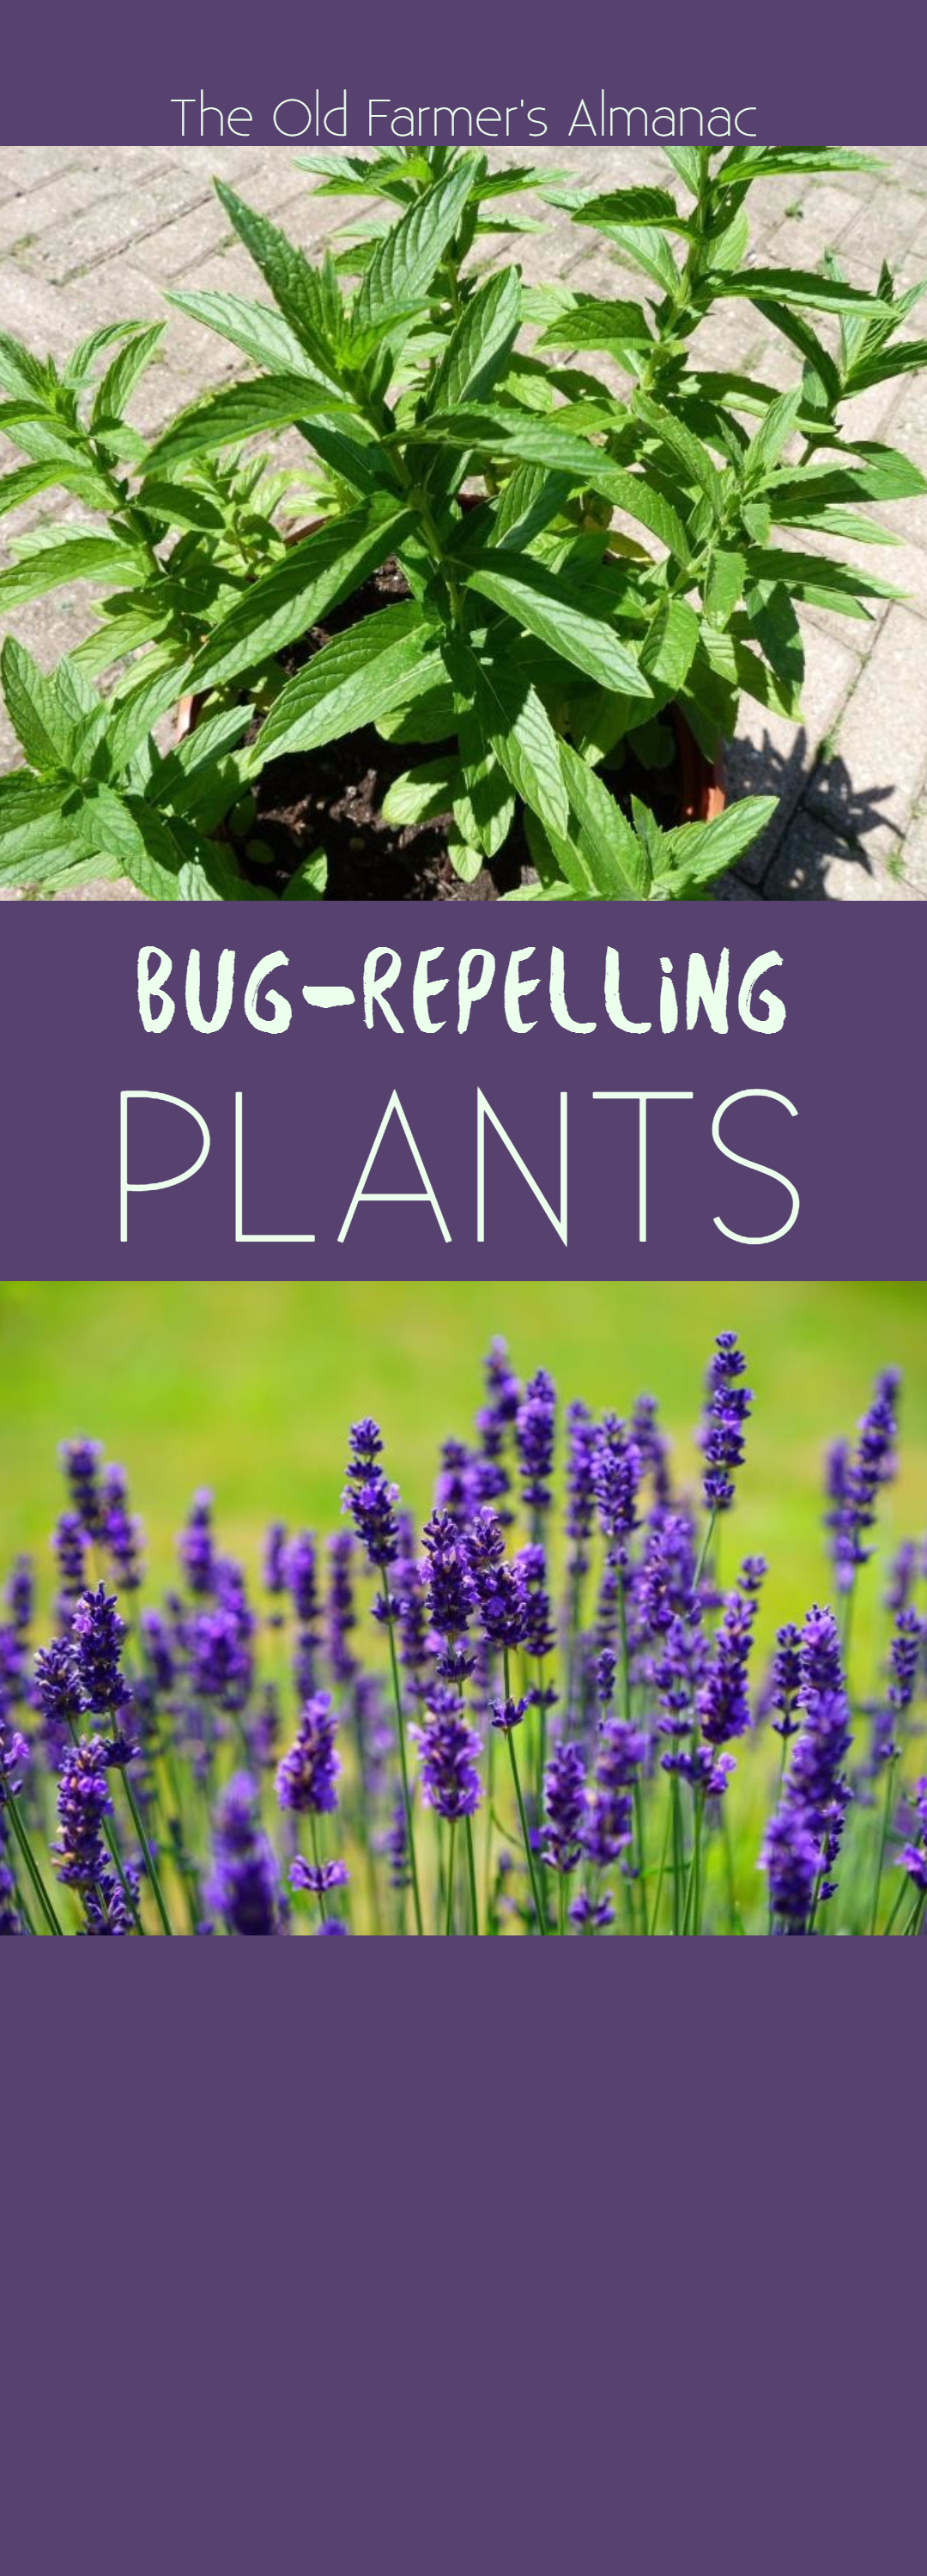 OFA 6-27-17 insect repelling plants Design 